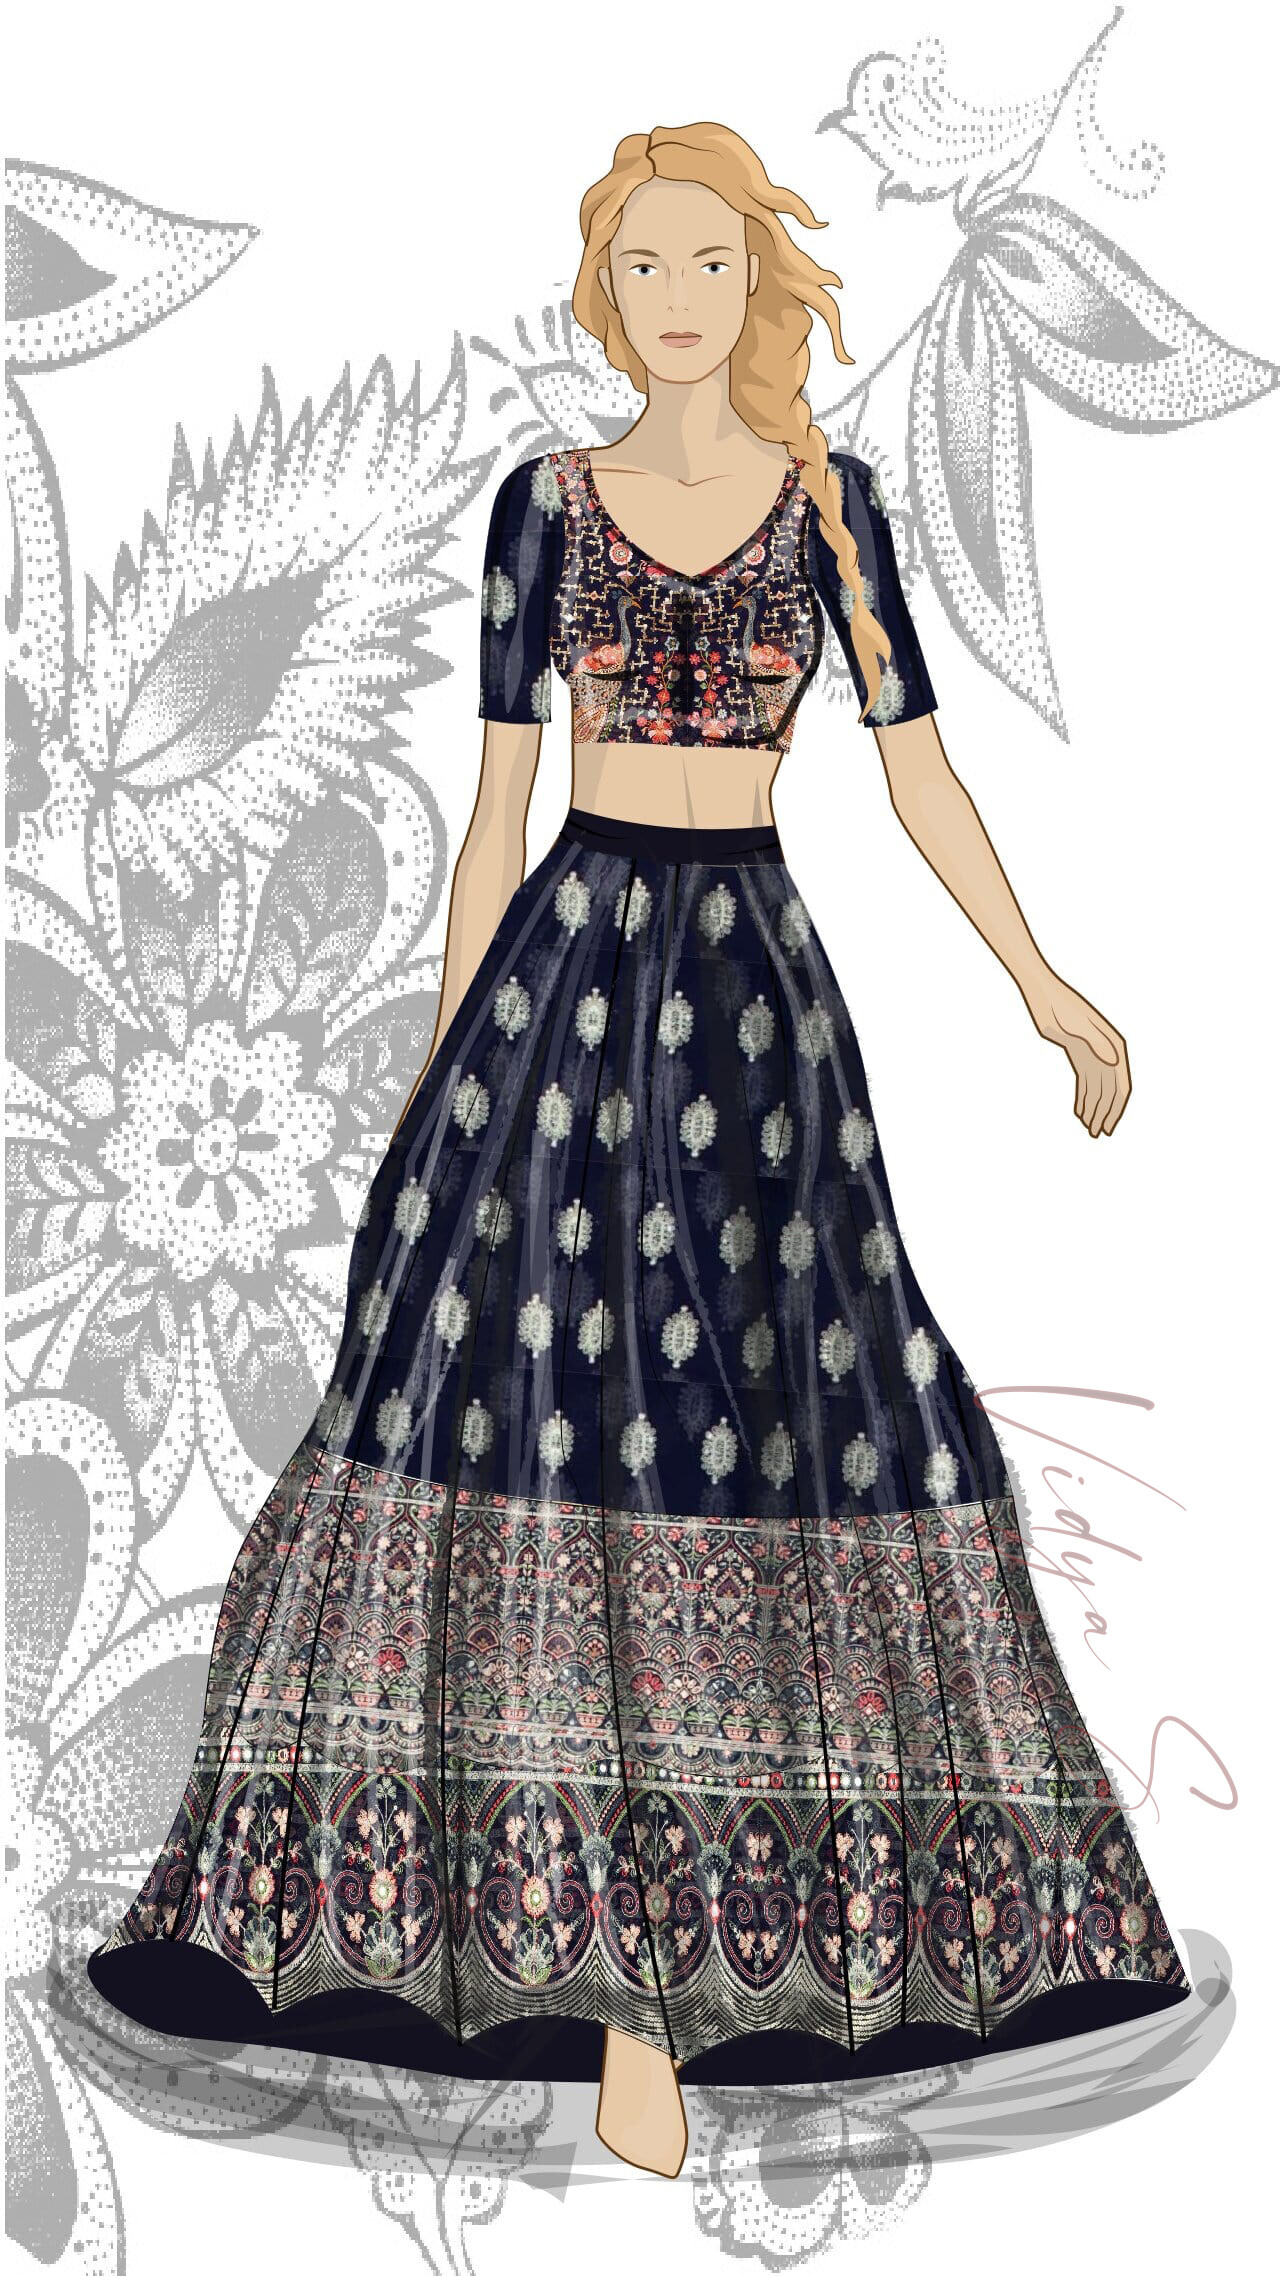 Learn to Draw Beauitful Fashion Illustration for Lehengas! | Fashion  illustration sketches dresses, Dress design sketches, Fashion design  sketches